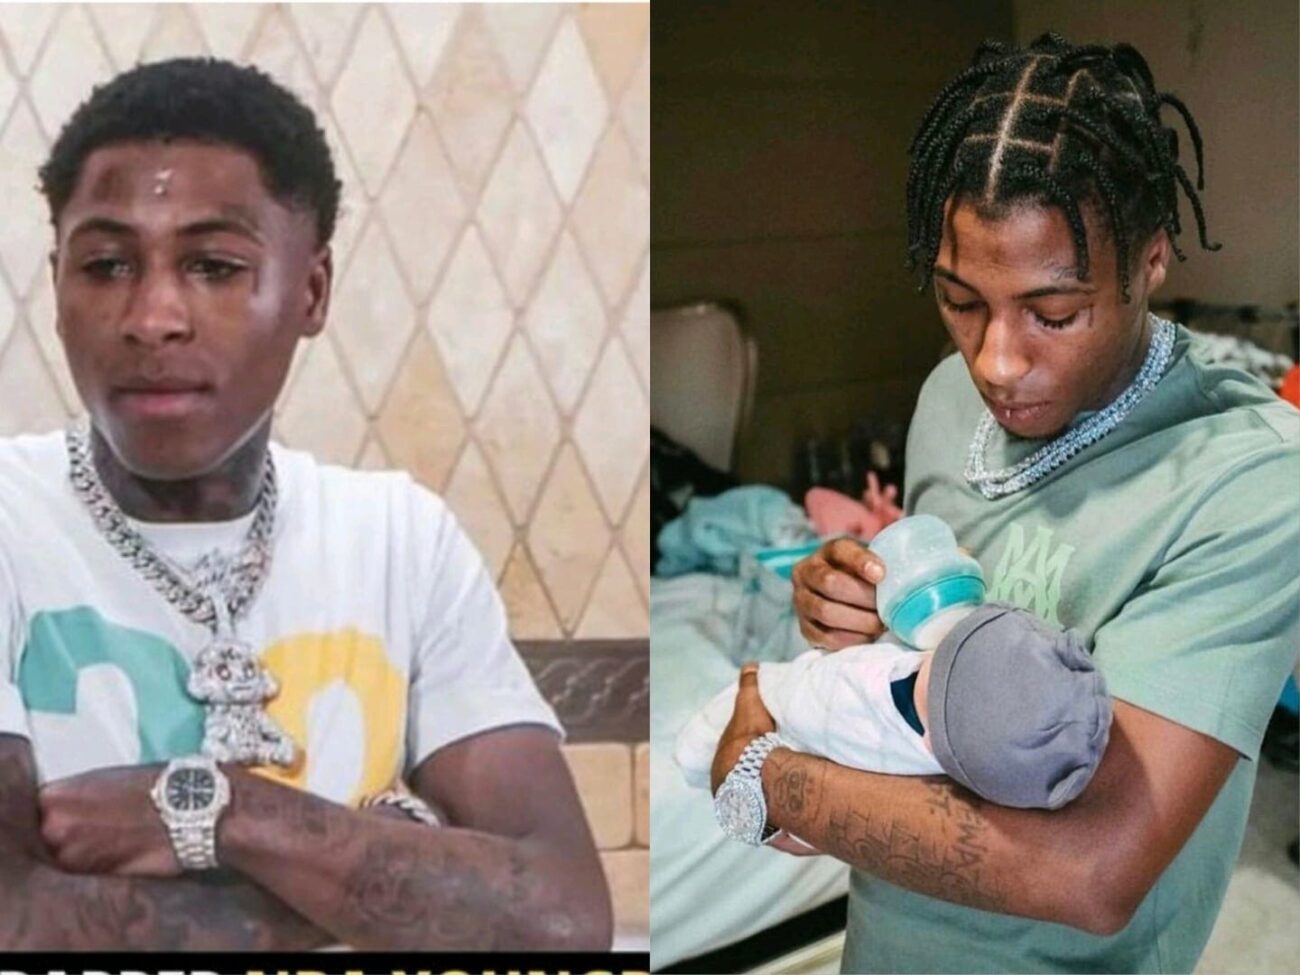 Father of all nations’ – Funny reactions as Rapper NBA YoungBoy welcomes his 10th child at the age of 21